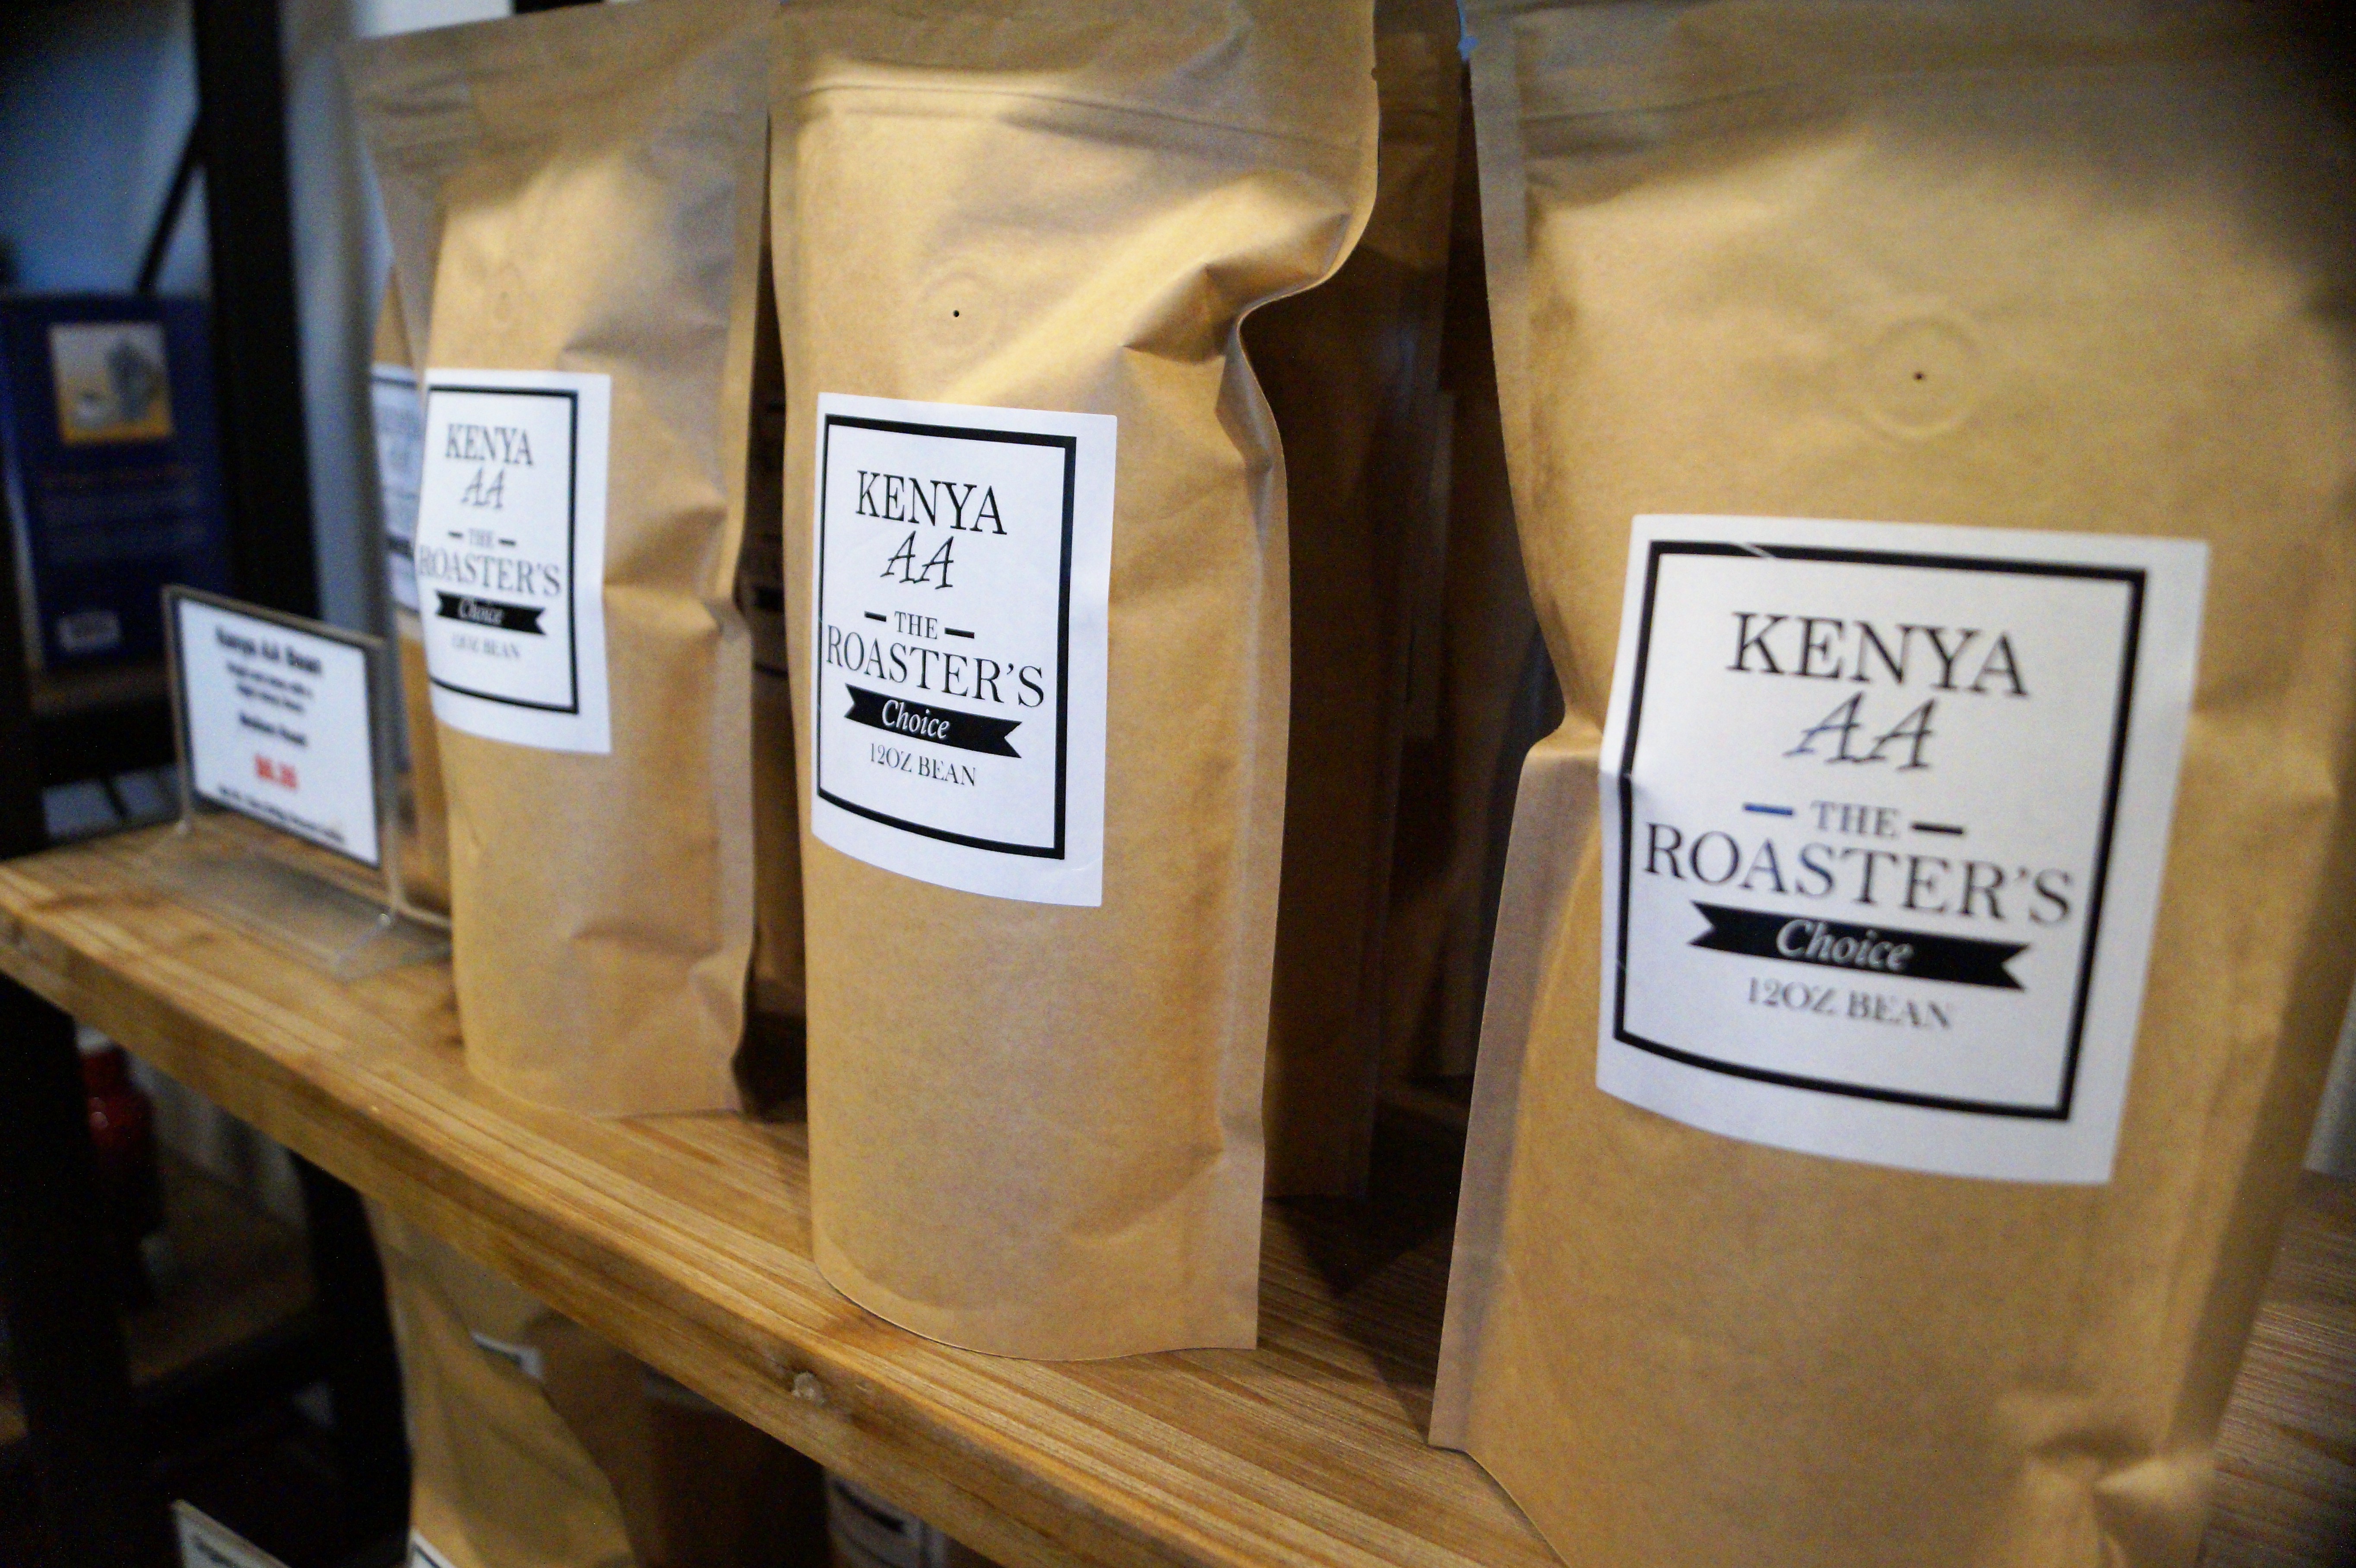 In addition to their popular coffee blends, Paul deLima sells single-sourced coffee beans such as these from Kenya, which they'll grind free for you.